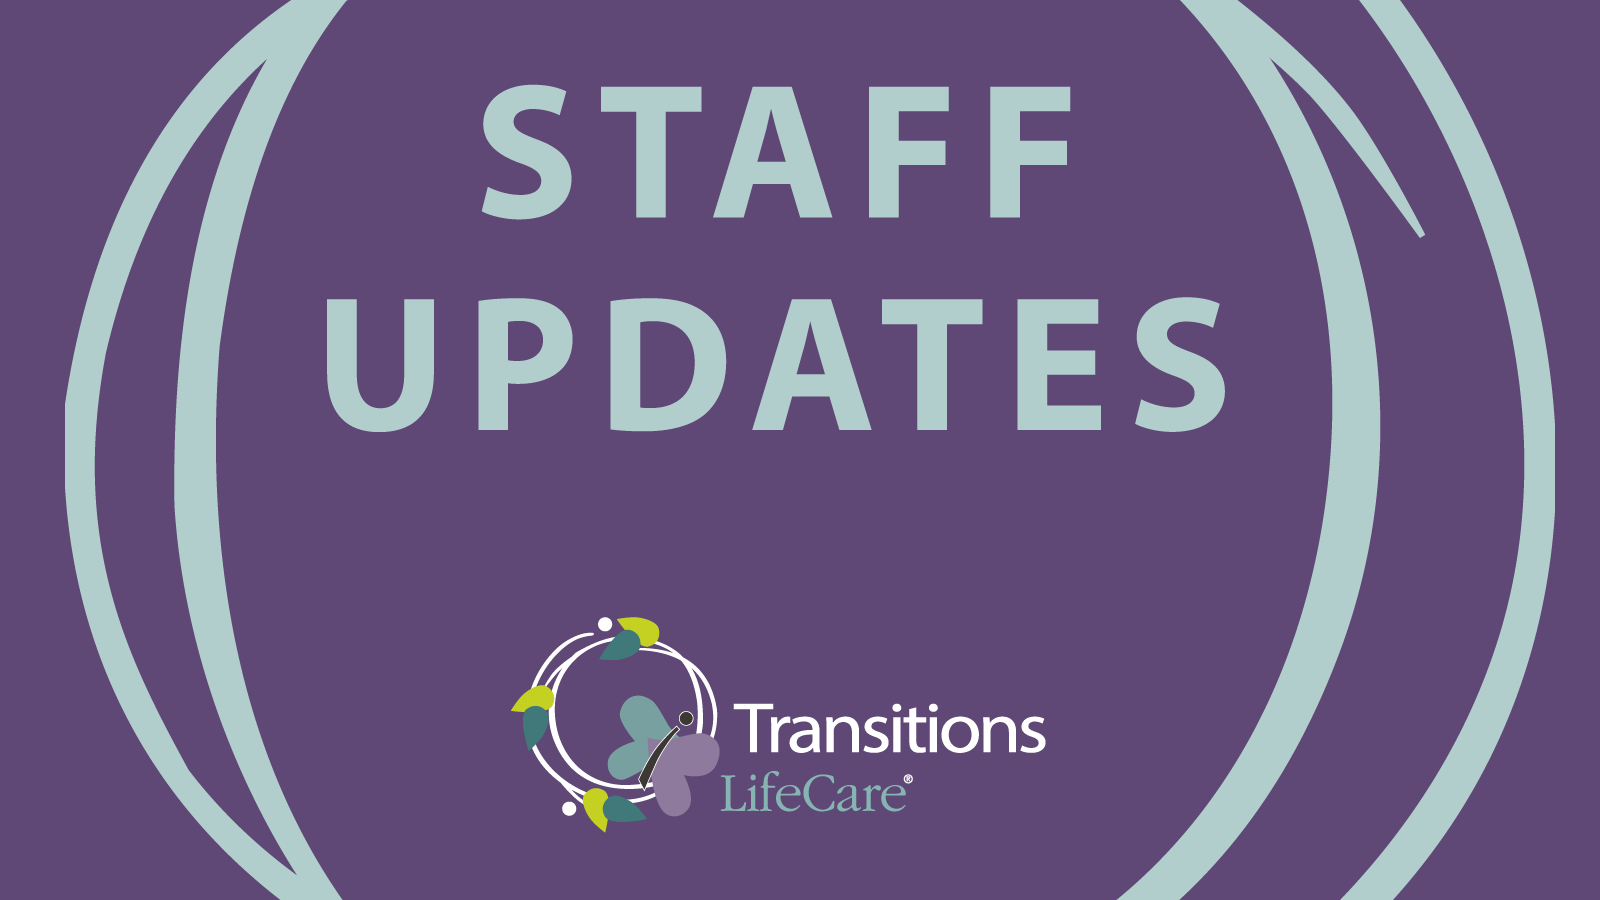 Transitions LifeCare Staff Updates - Transitions LifeCare